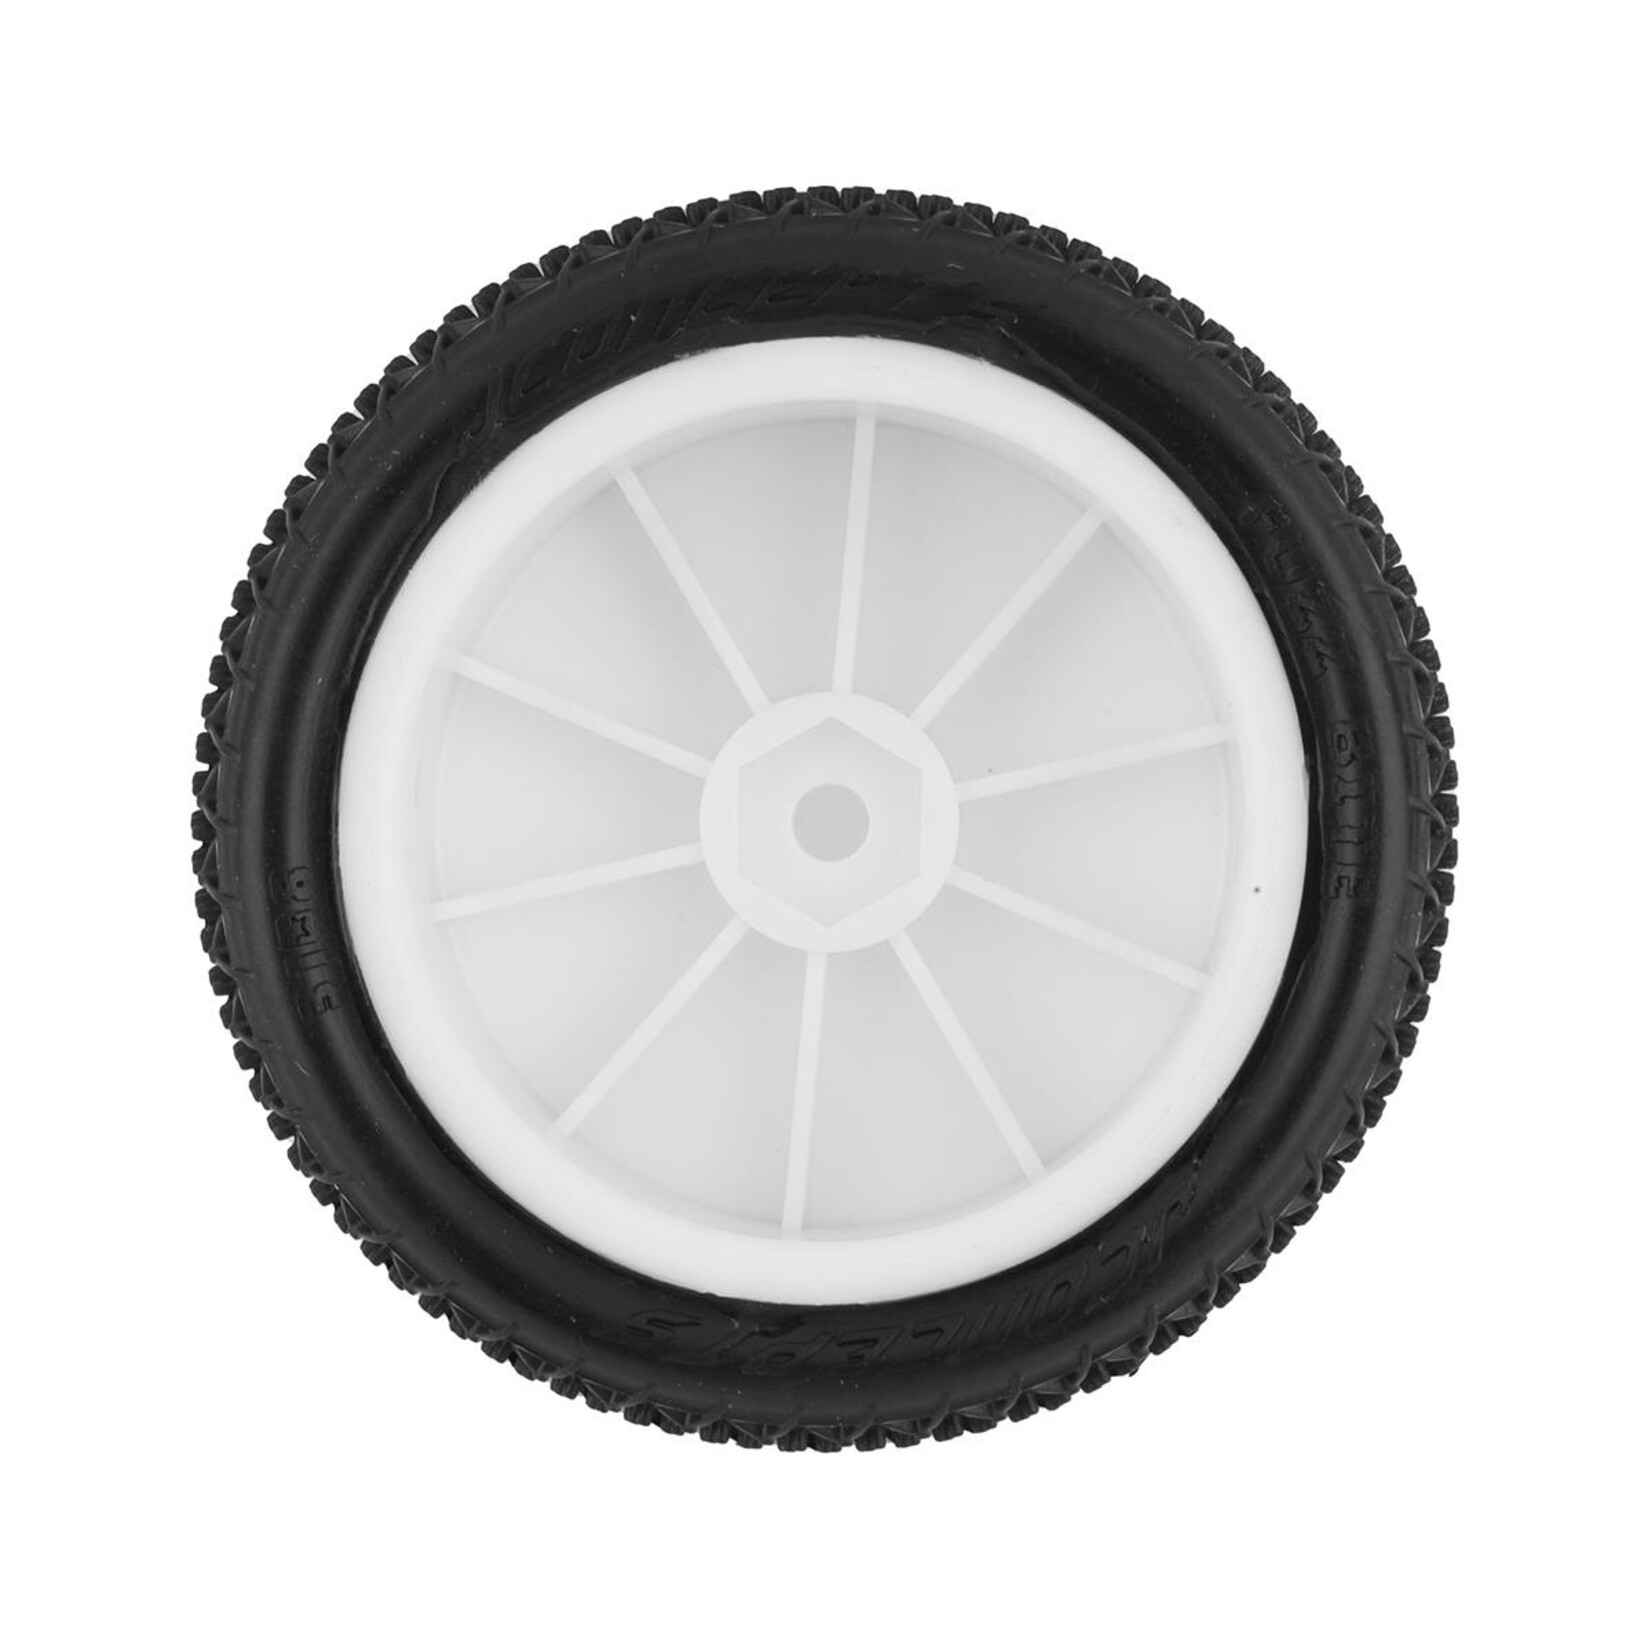 JConcepts JConcepts Fuzz Bite LP 2.2" Pre-Mounted 4WD Front Buggy Tire (White) (2) (Pink) w/12mm Hex #3108-101011